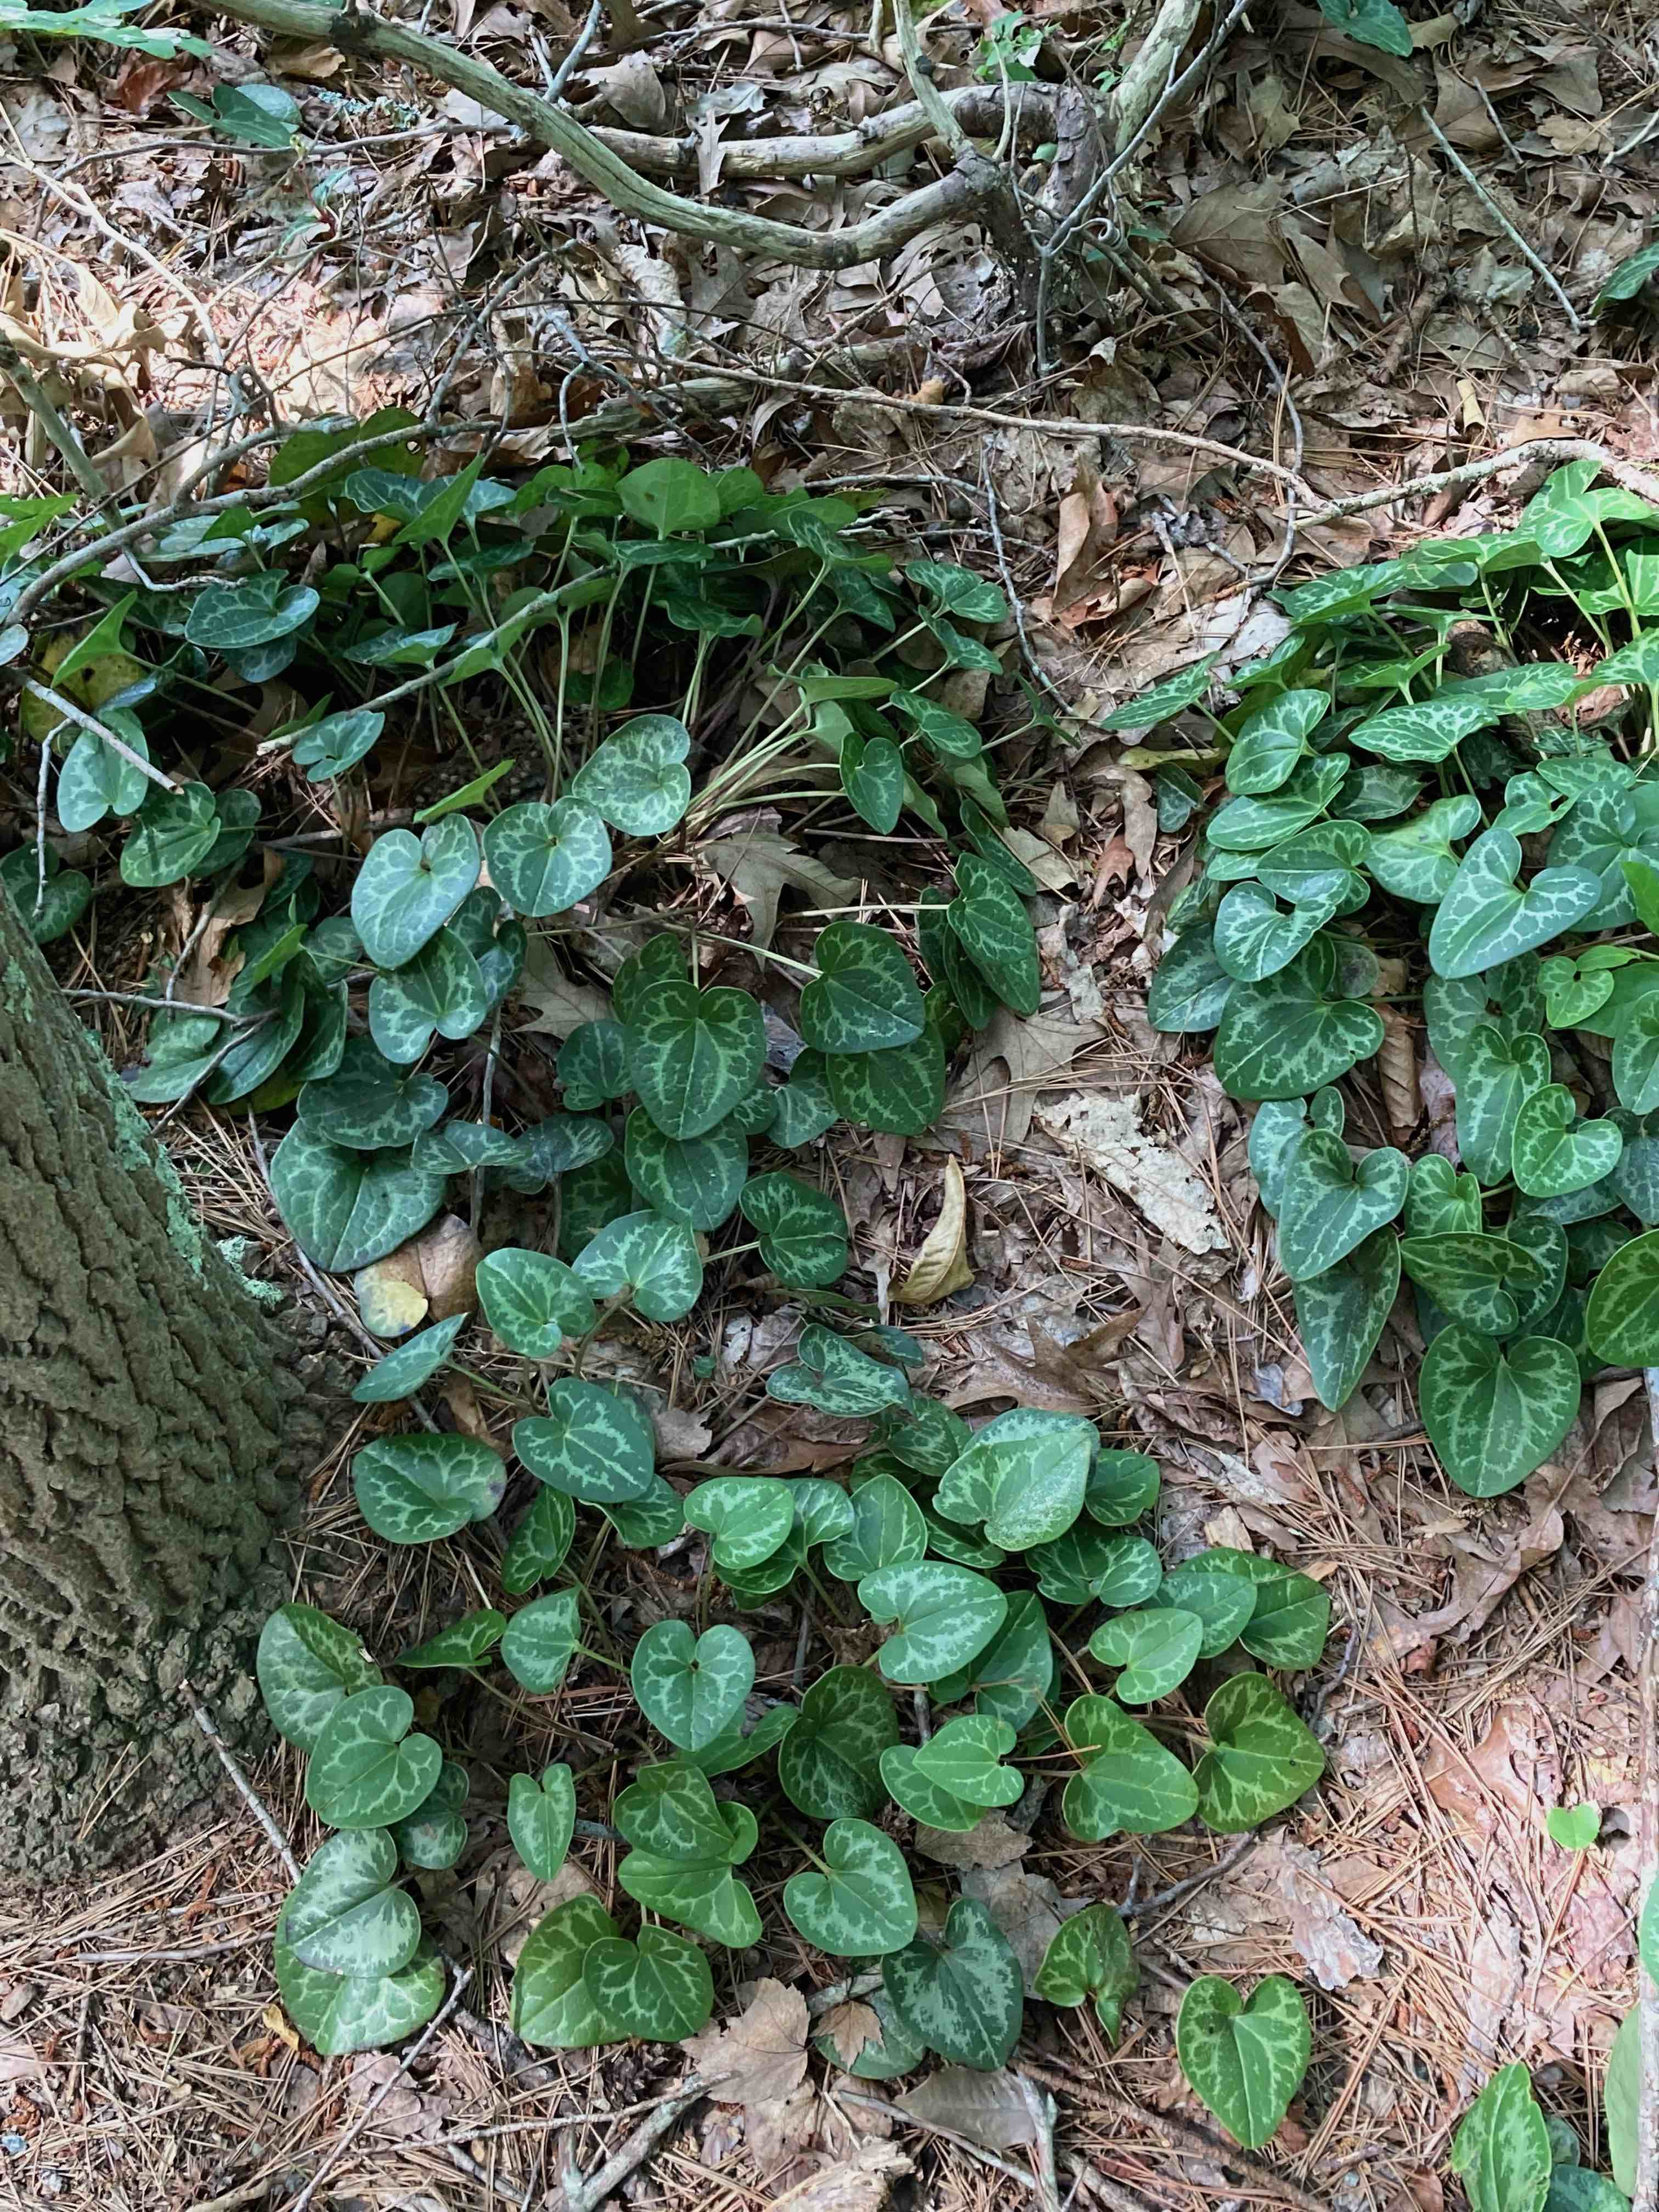 The Scientific Name is Hexastylis minor. You will likely hear them called Little Heartleaf, Little Ginger. This picture shows the Several plants growing together in the forest understory. of Hexastylis minor